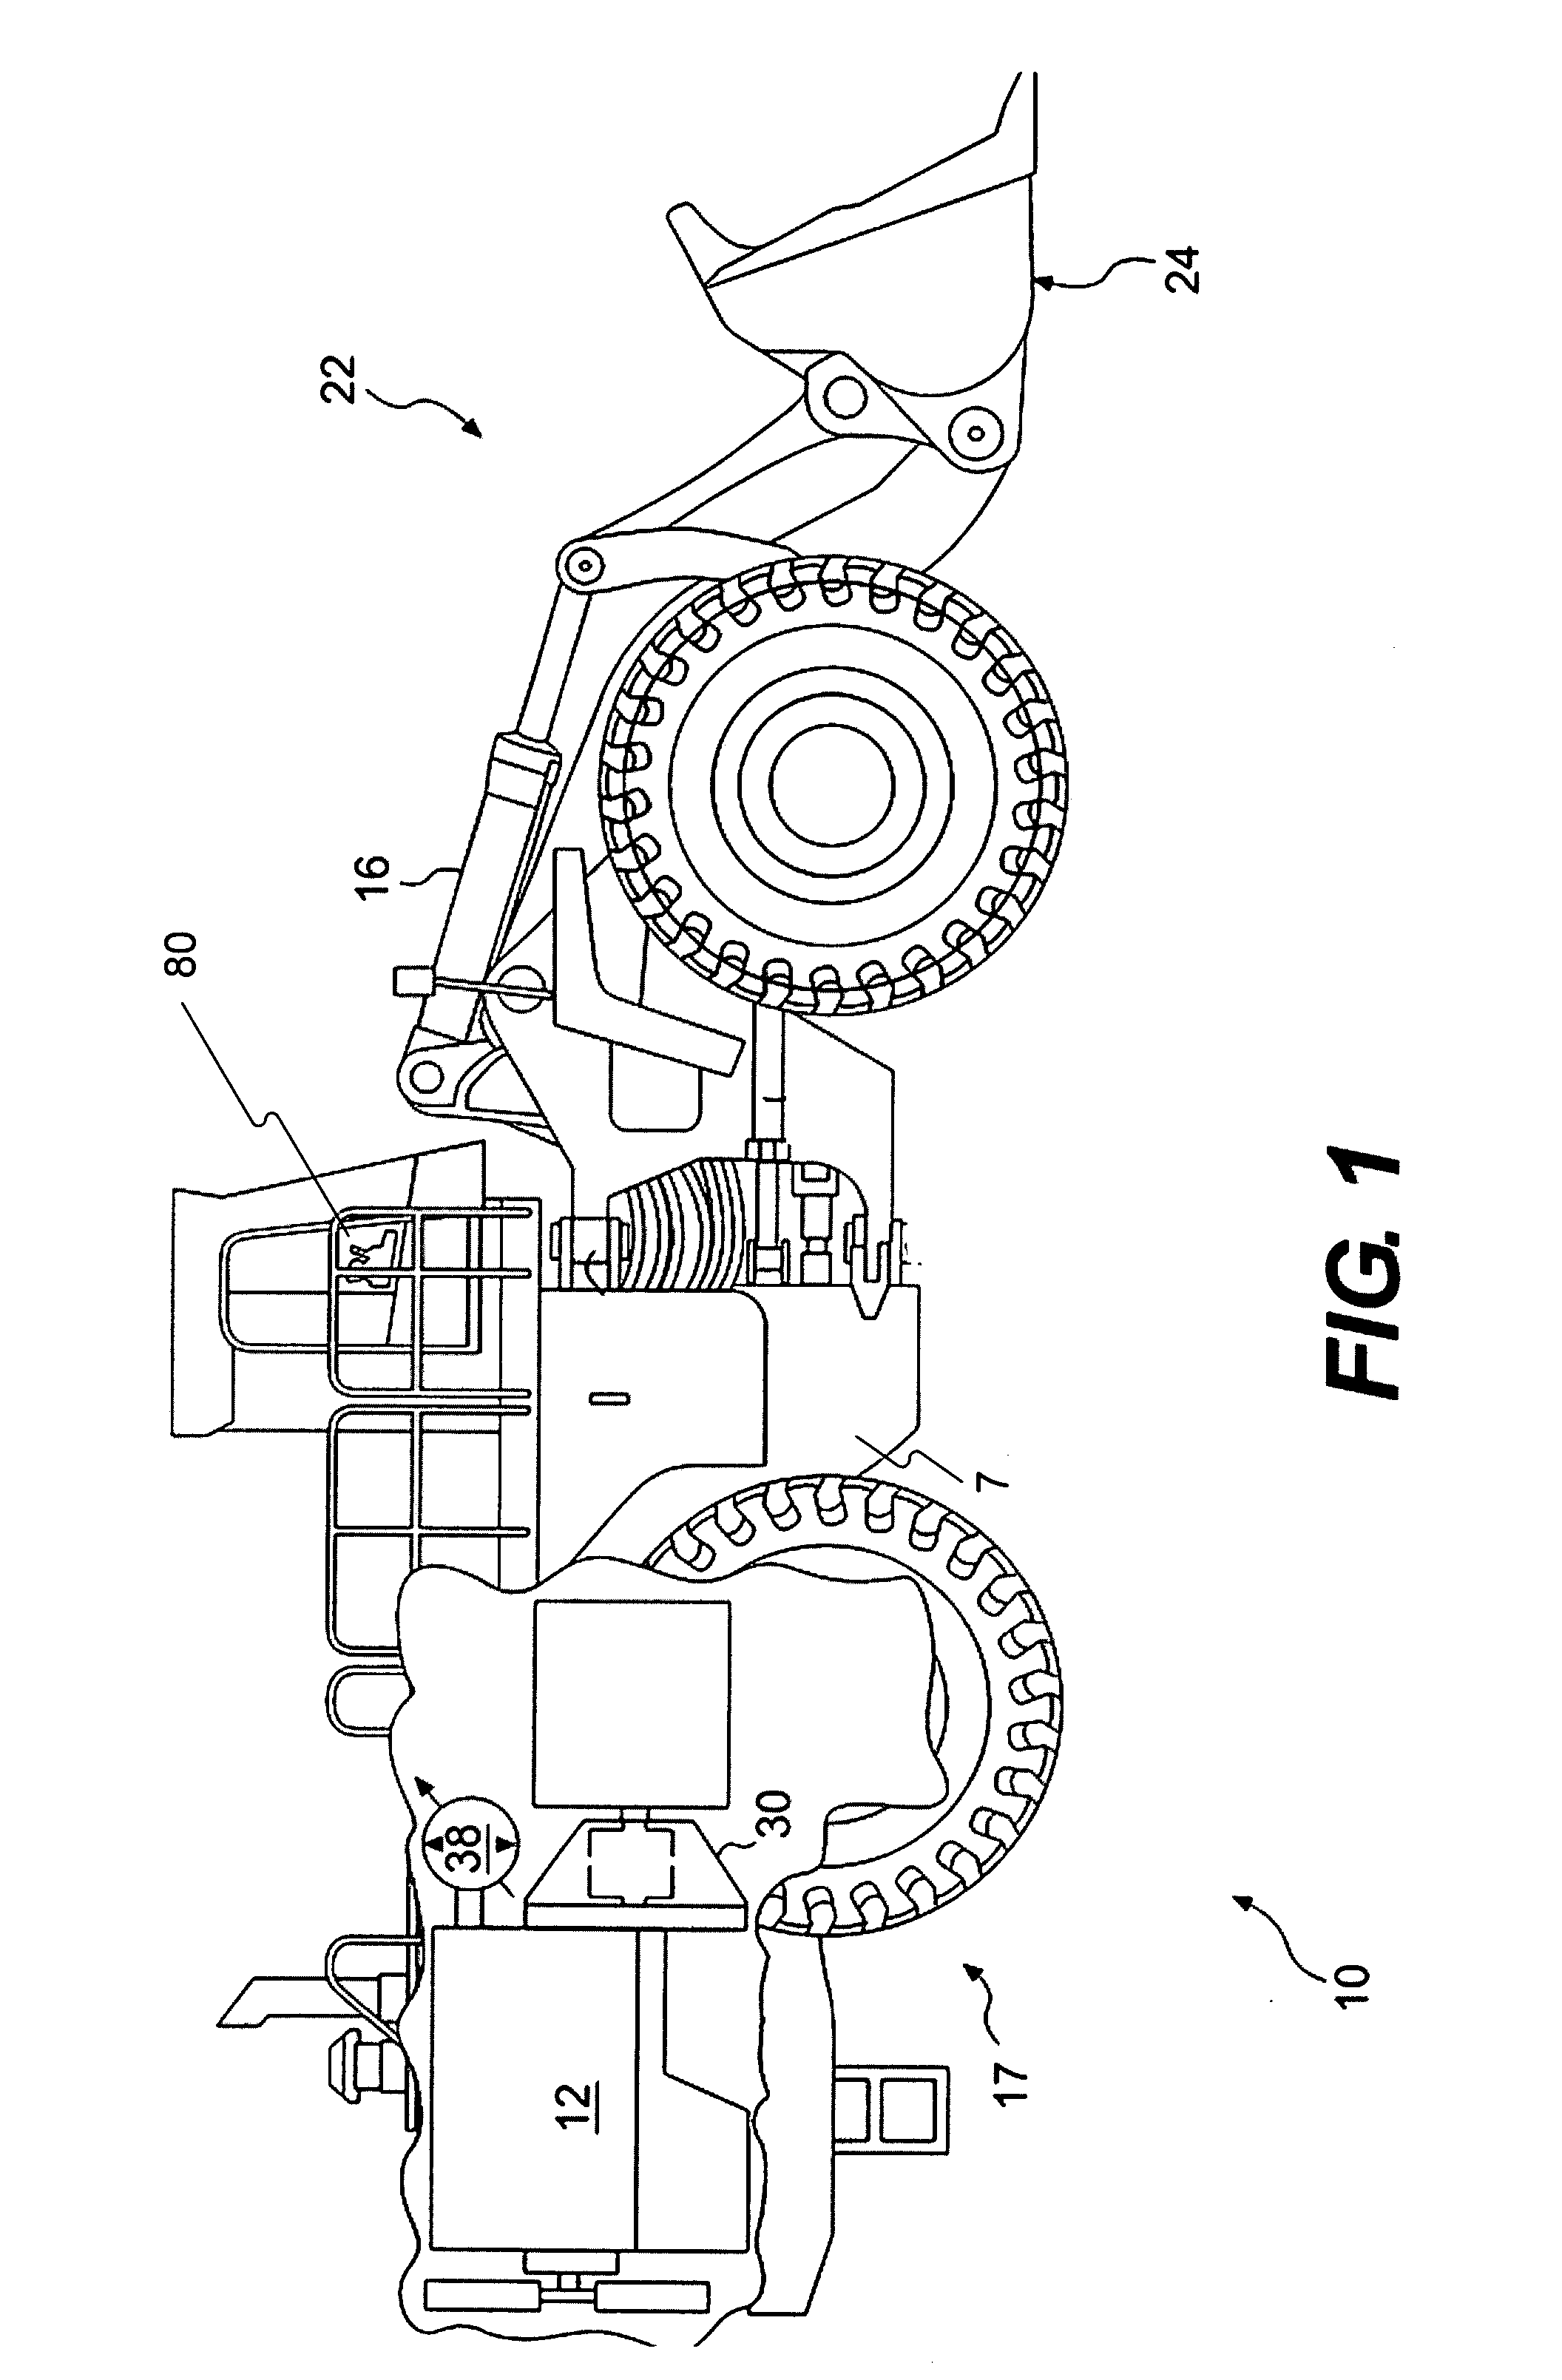 Method and system for limiting torque load associated with an implement